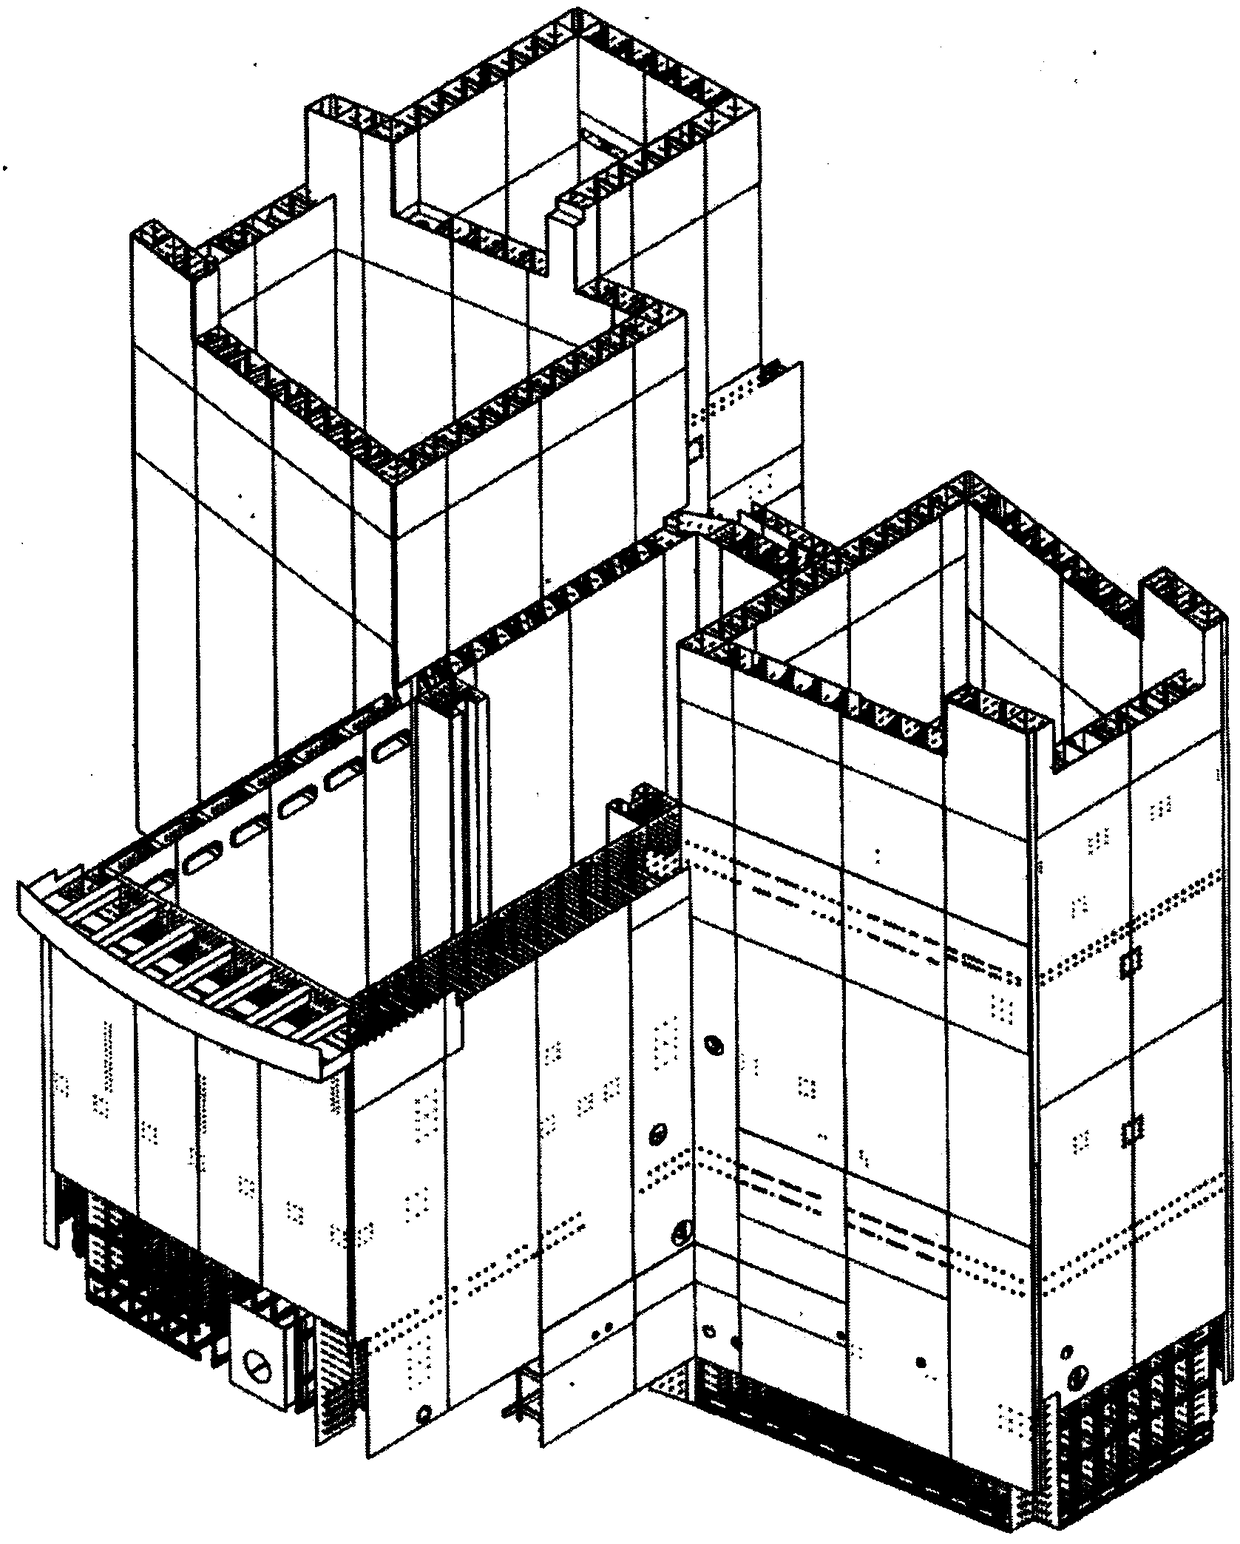 Vertical assembling method for structural modules of nuclear power plant